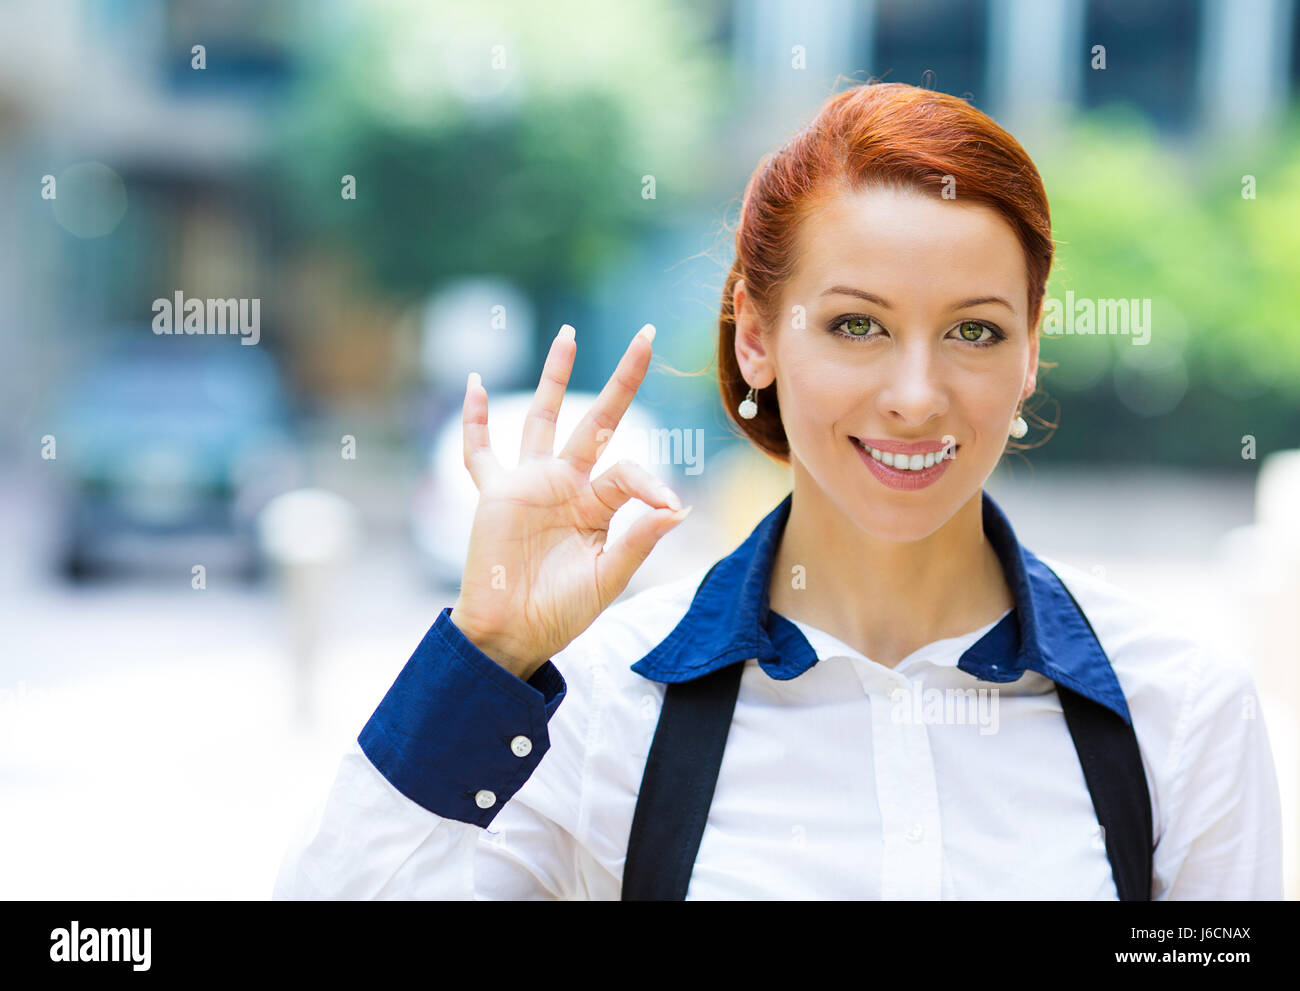 Closeup portrait happy smiling business woman, customer, professional giving ok sign isolated background outdoors corporate office. Positive human emo Stock Photo